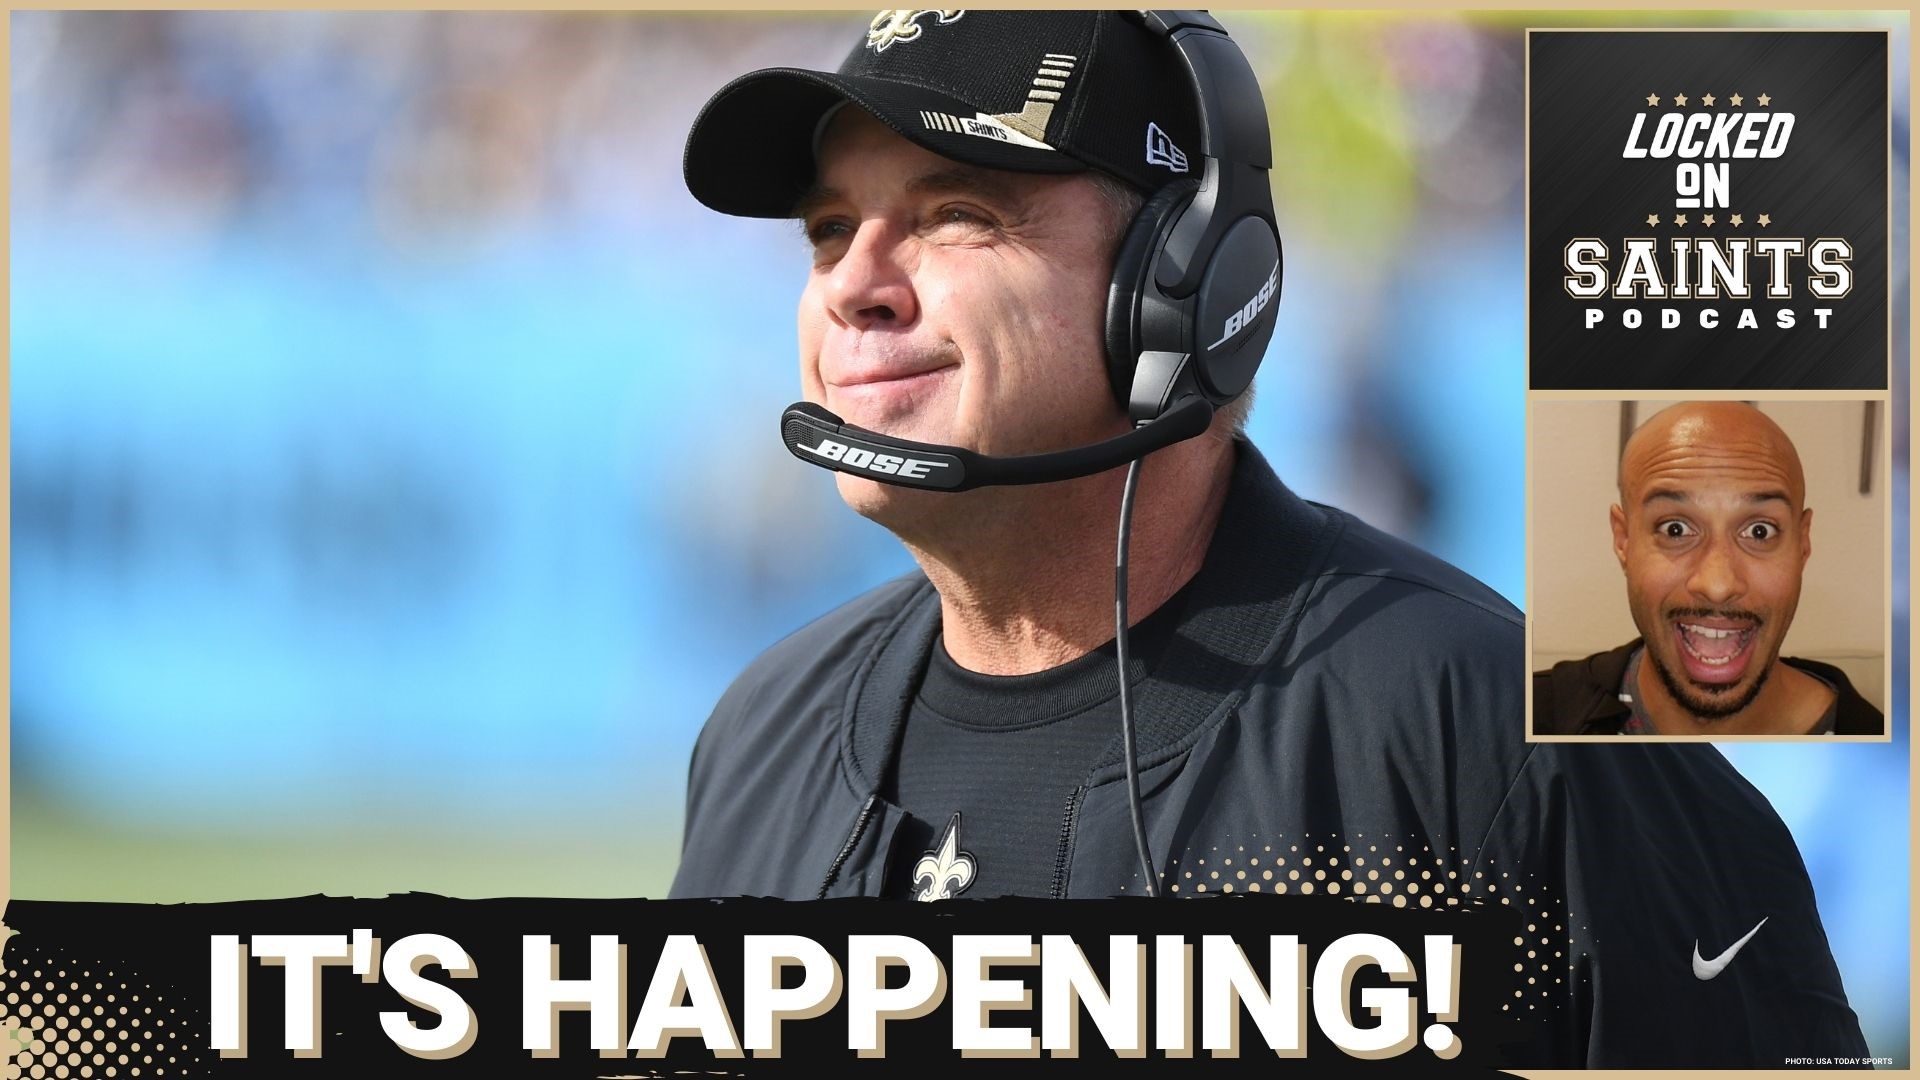 The New Orlean Saints have traded Sean Payton to the Denver Broncos and are now back in the first round of the NFL Draft.